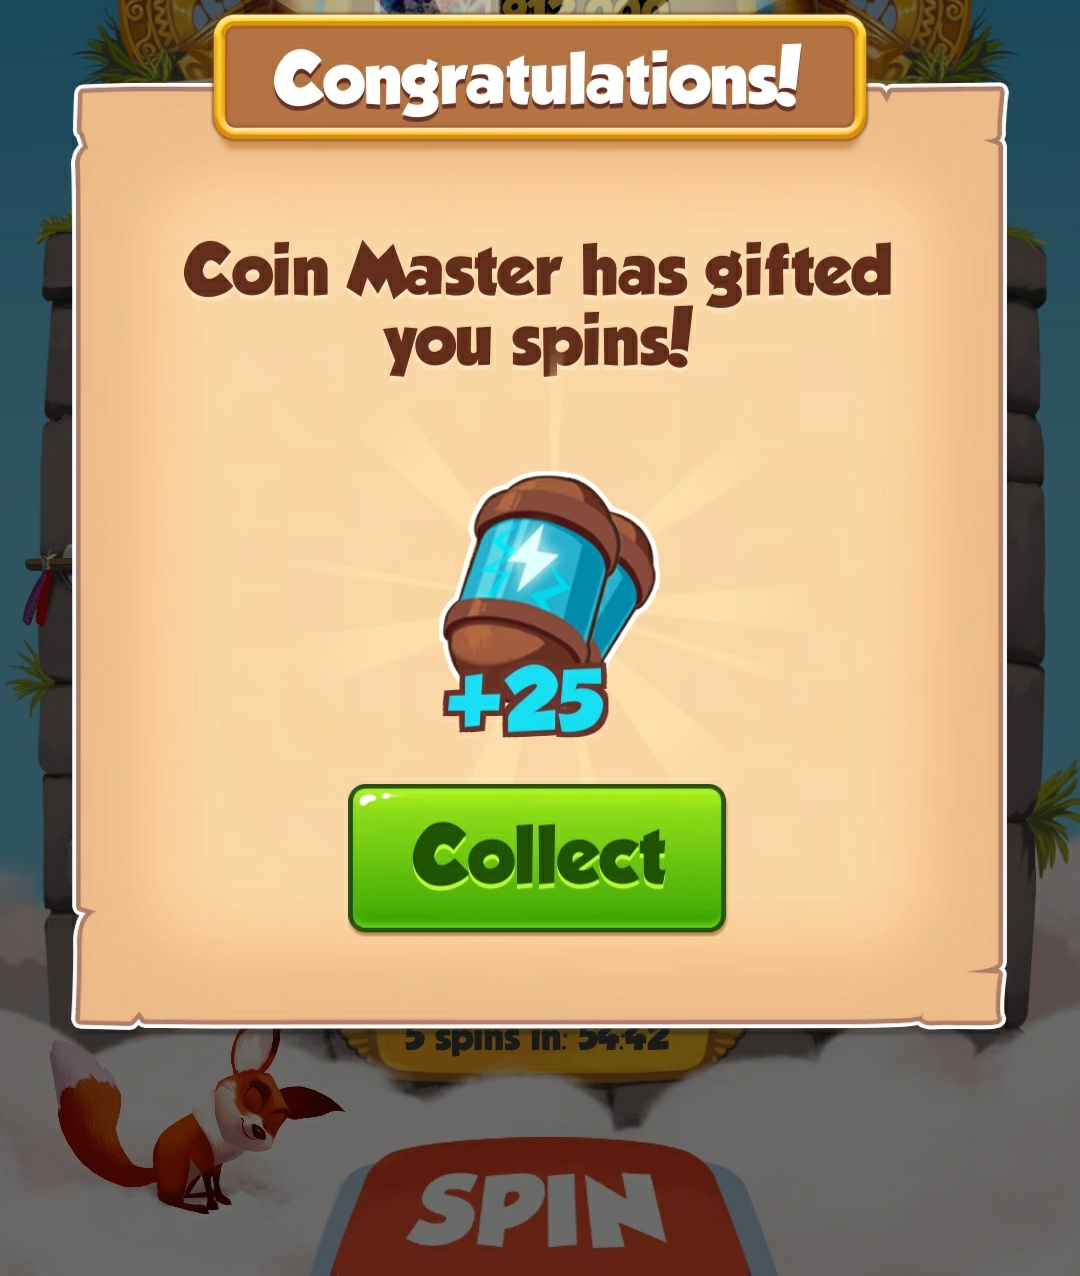 50 000 free spins coin master